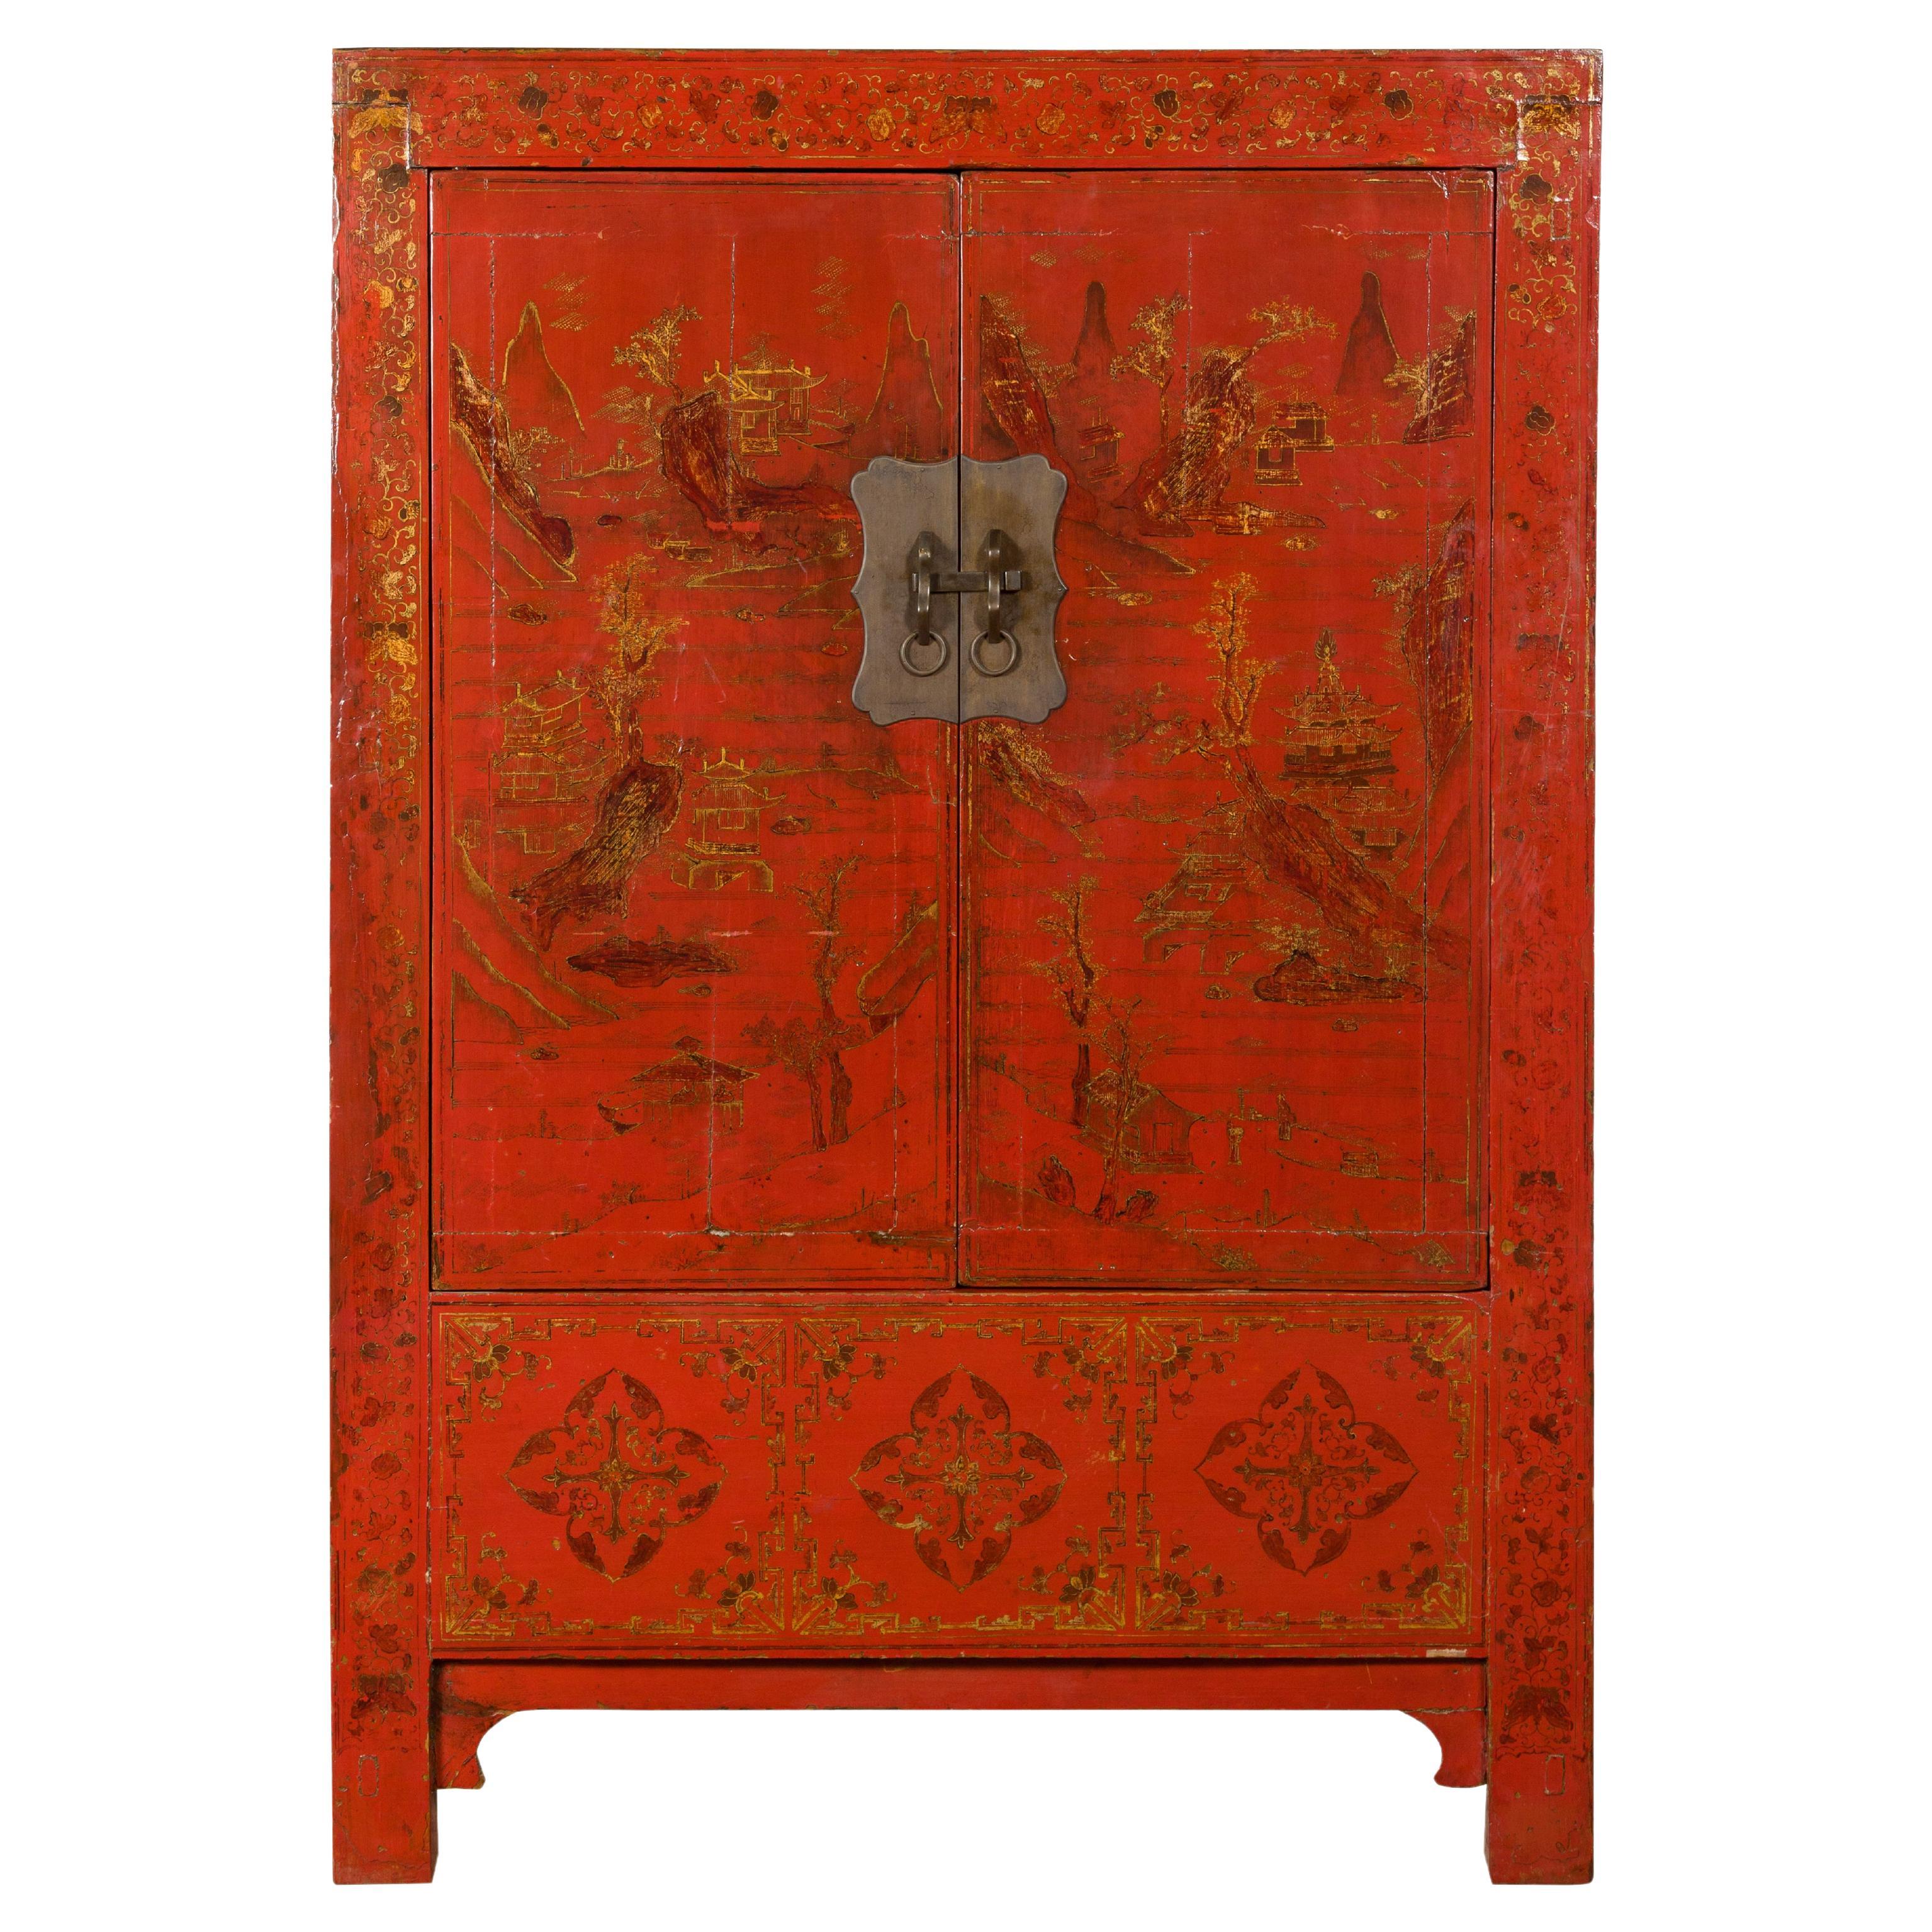 Qing Dynasty Red Lacquer 19th Century Cabinet with Gilded Hand-Painted Décor